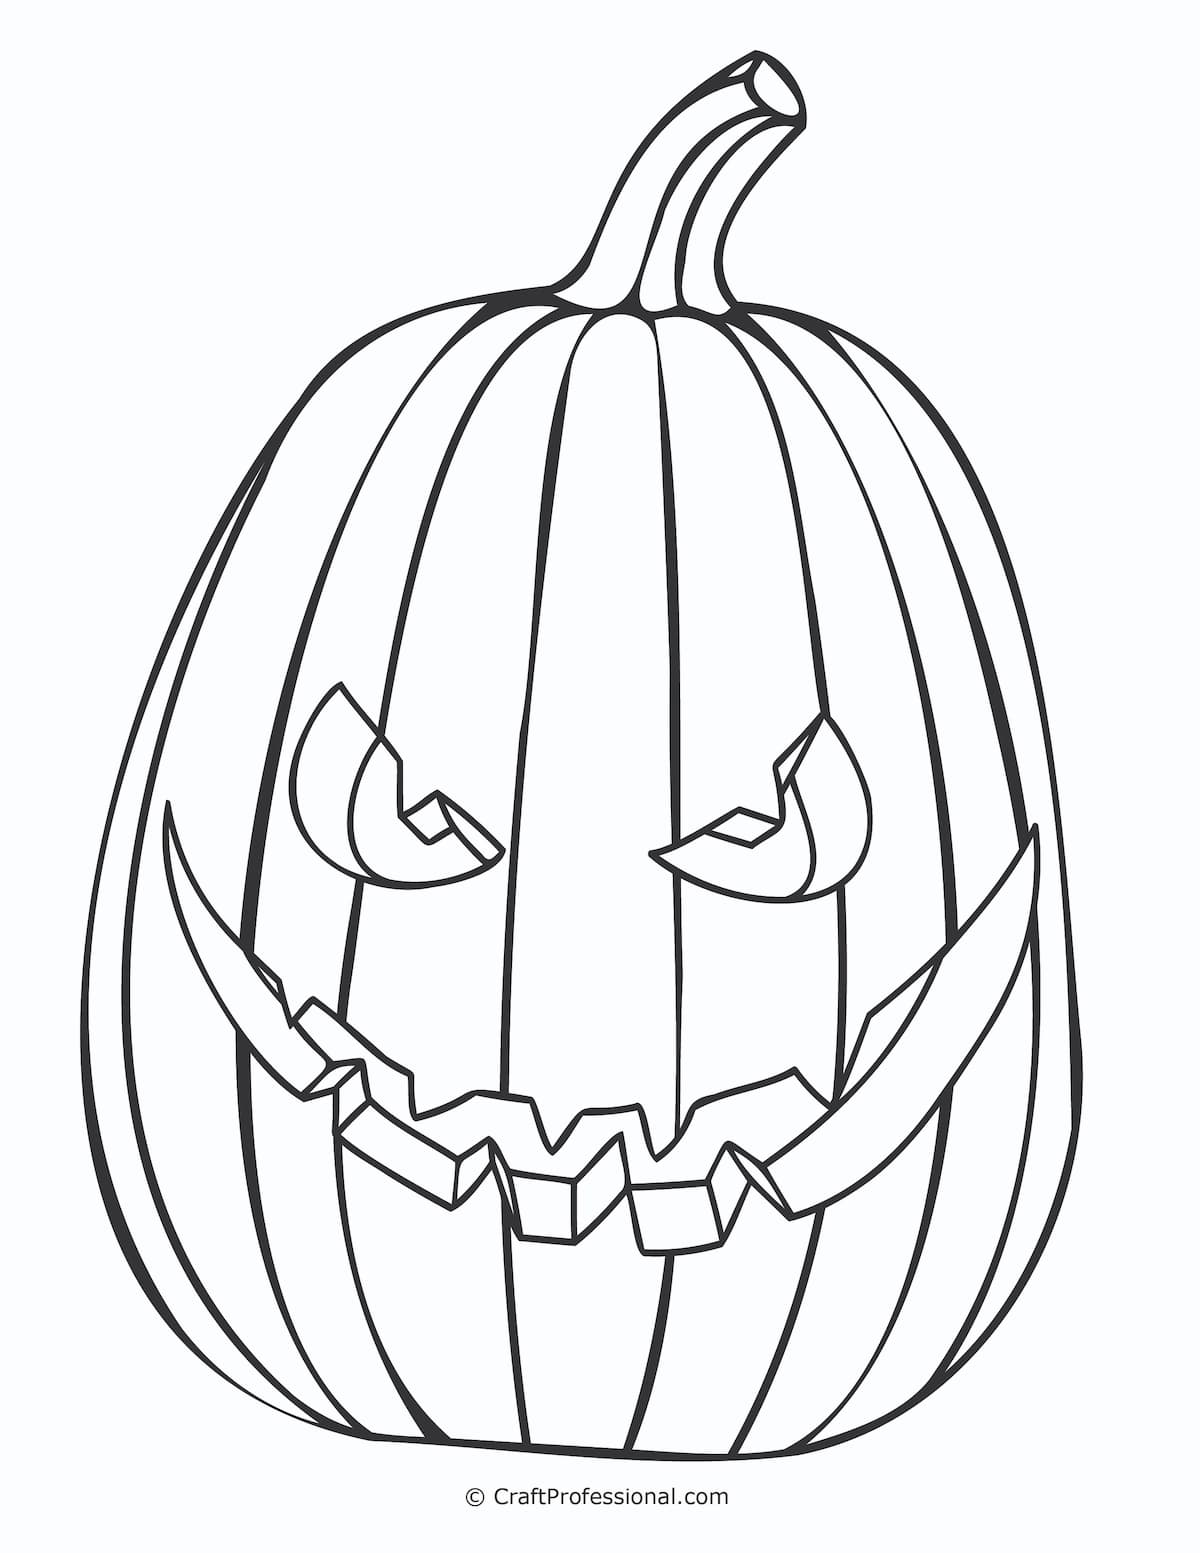 pumpkin-kids-coloring-pages-halloween-top-10-free-printable-halloween-pumpkin-coloring-pages